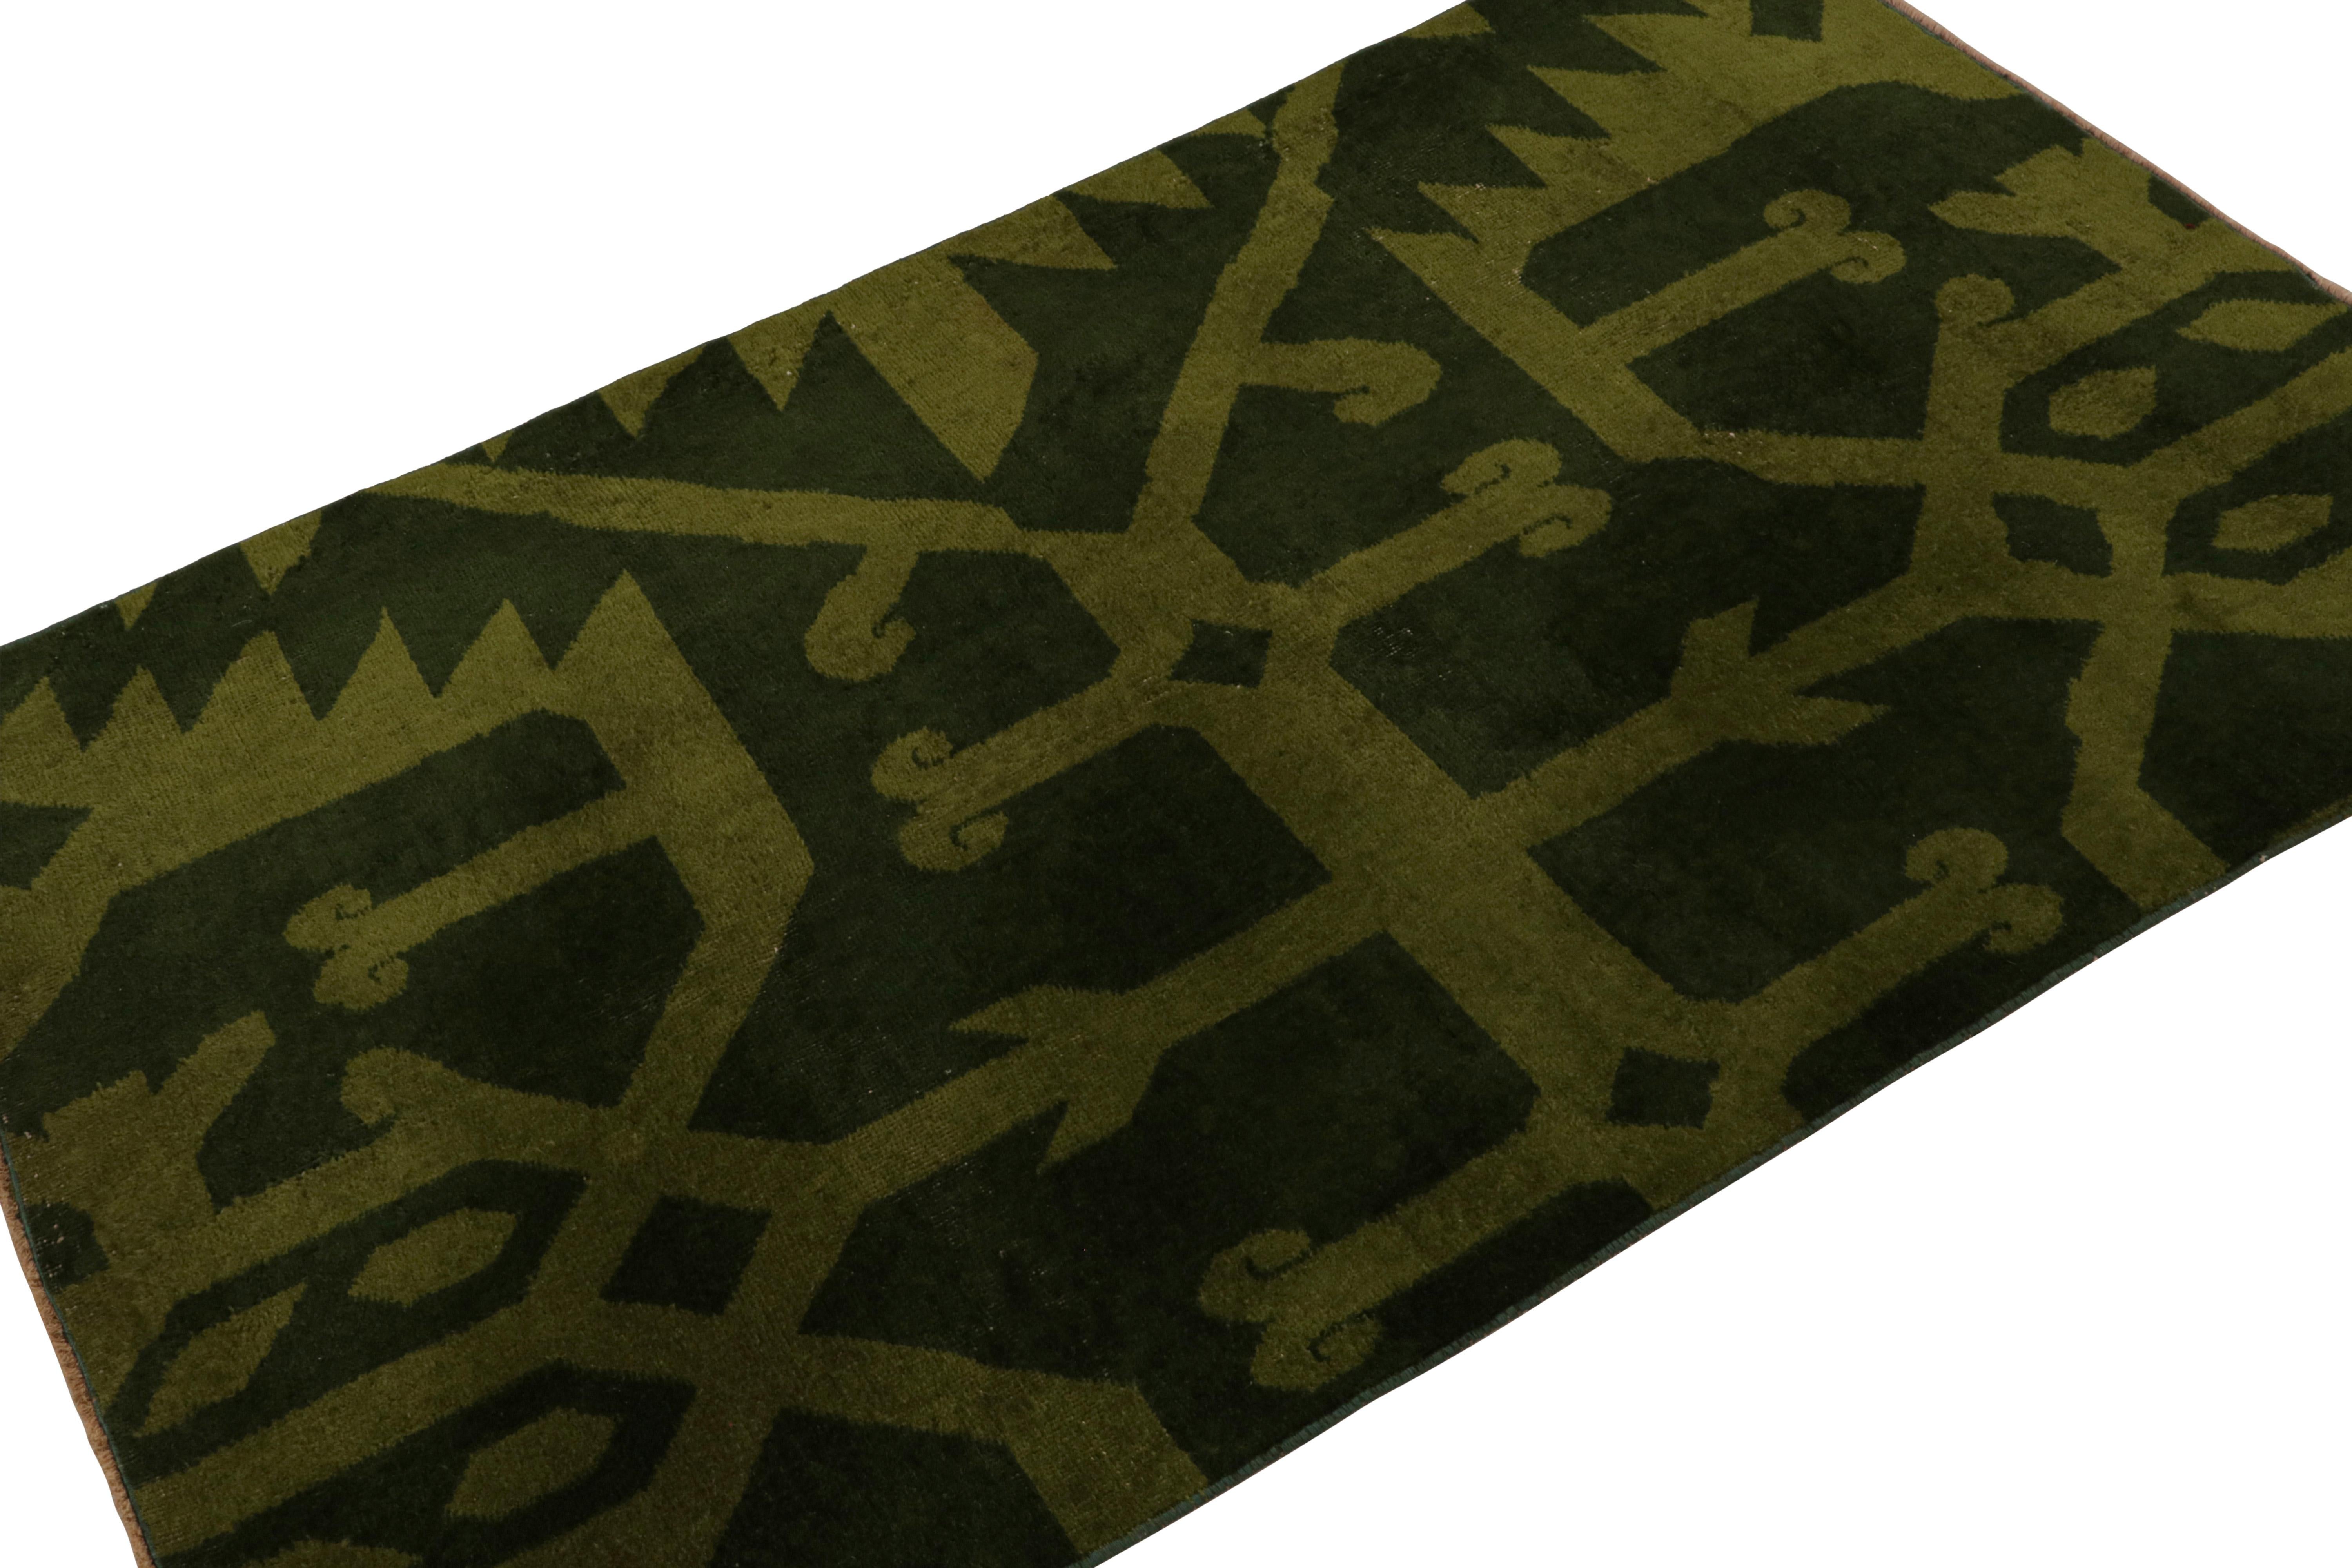 Hand-knotted in wool, circa 1960 - 1970, this 4x5 vintage Müren Art Deco rug features forest green field with chartreuse interconnected geometric patterns. 

On the Design: 

Connoisseurs will appreciate the design which is one-of-a-kind with forest